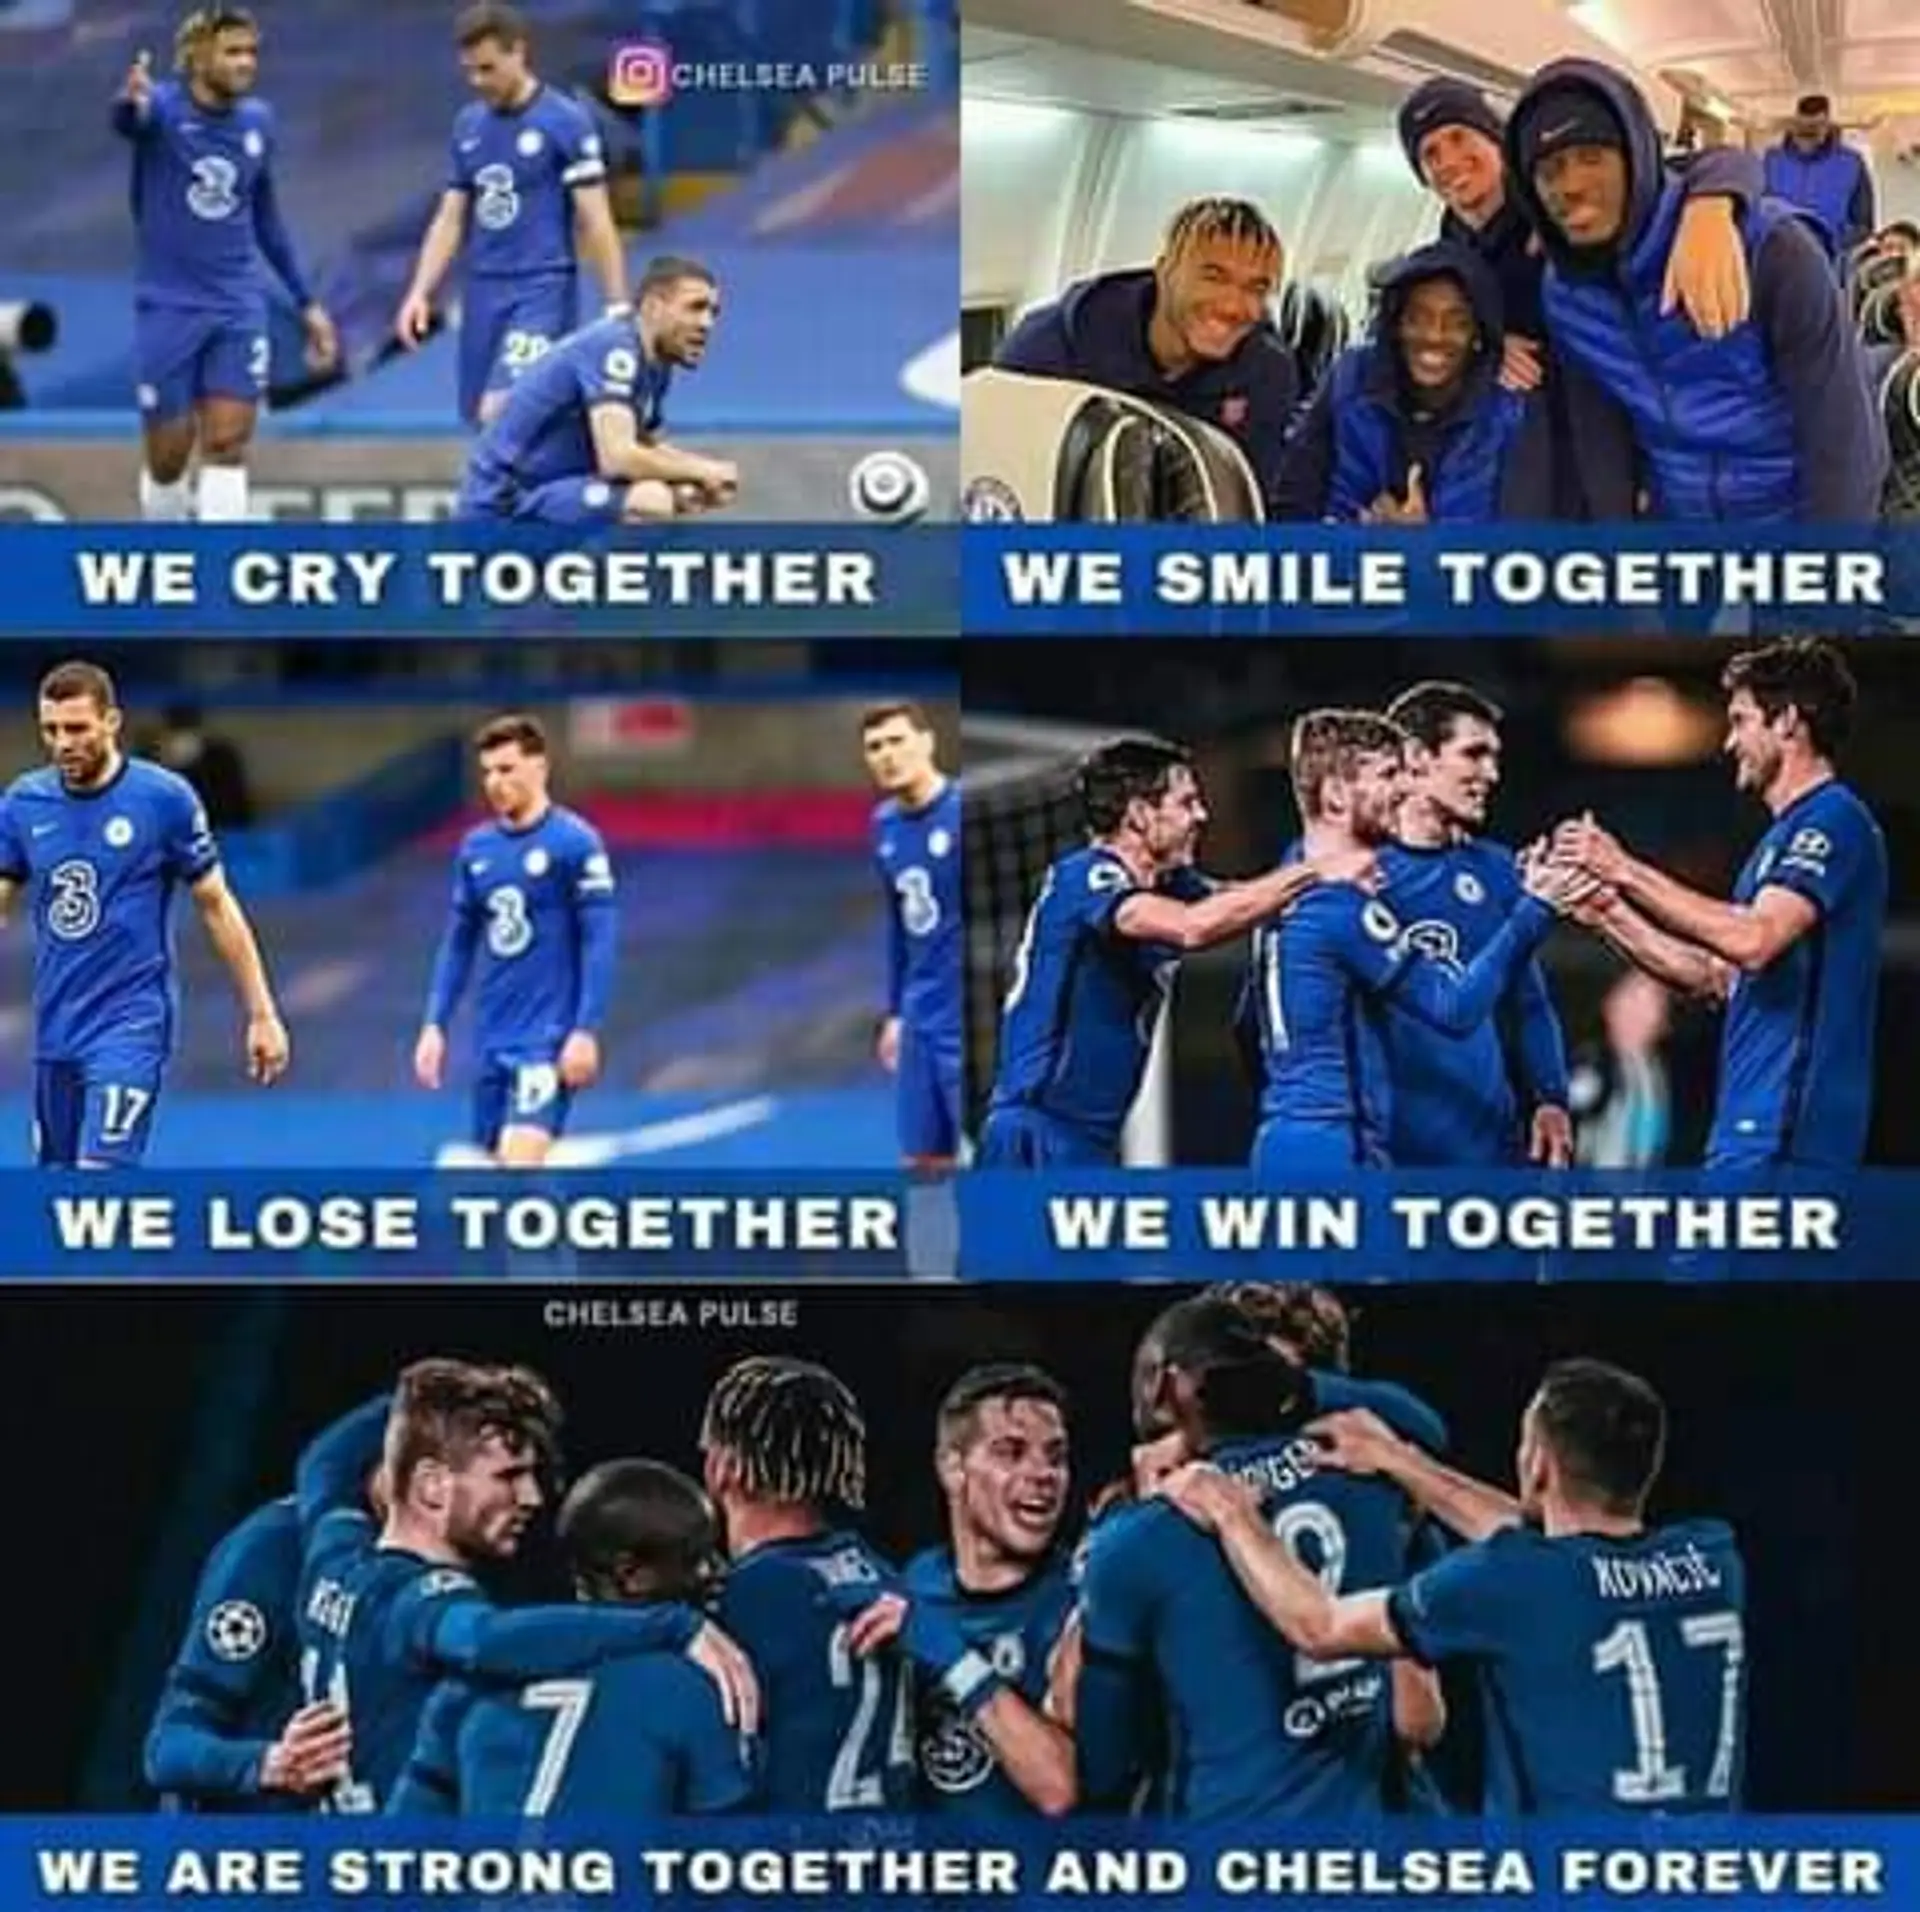 Appreciation to our darling team who fought relentlessly against Real Madrid